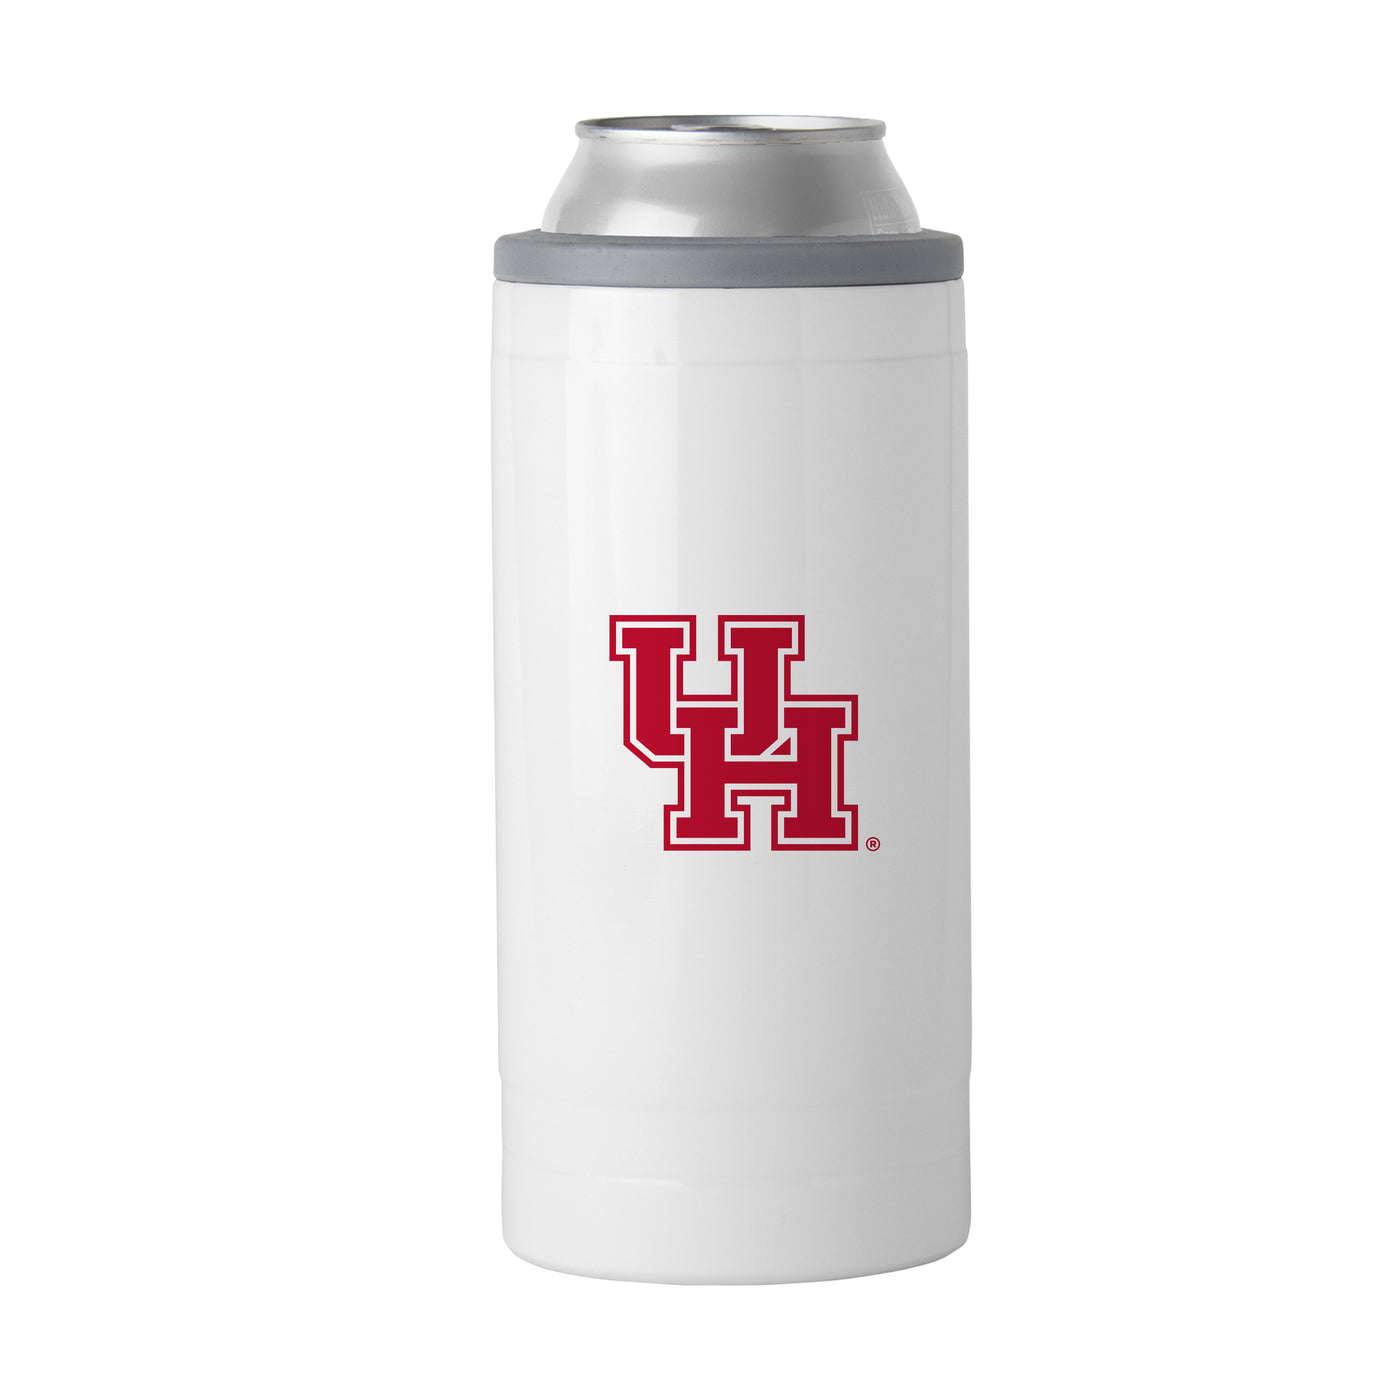 University of Houston Sugarland 12oz Gameday Slim Can Coolie